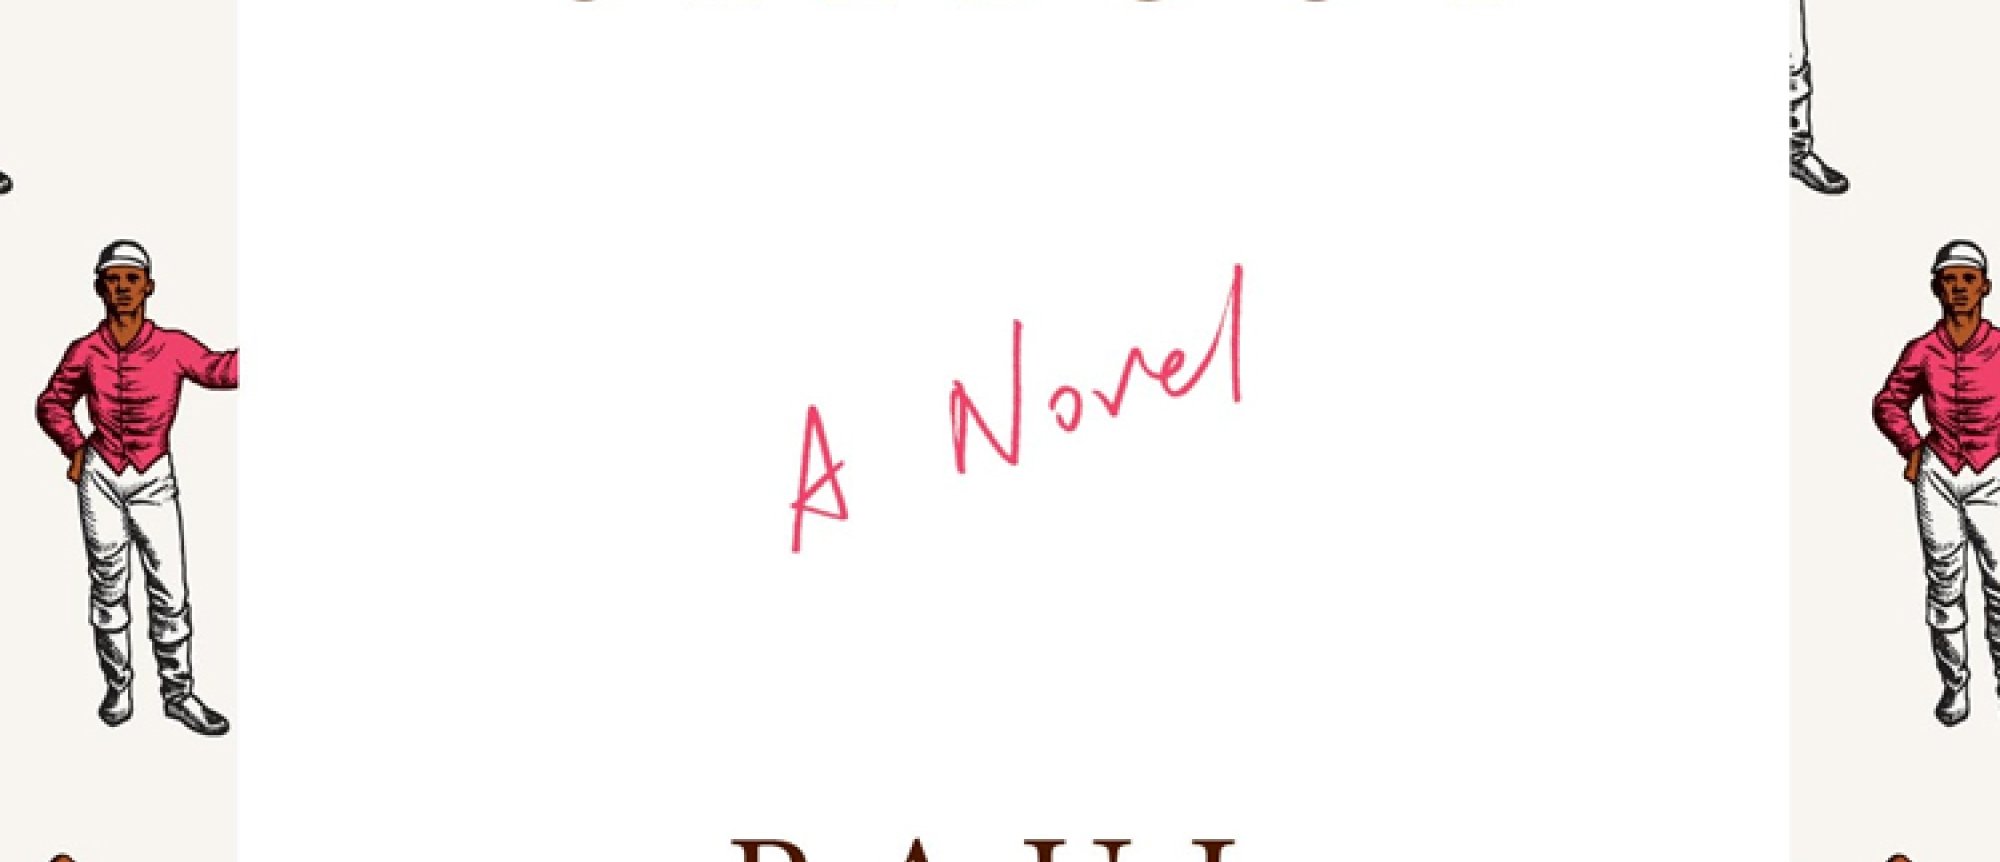 Paul Beatty's The Sellout wint Man Booker Prize 2016